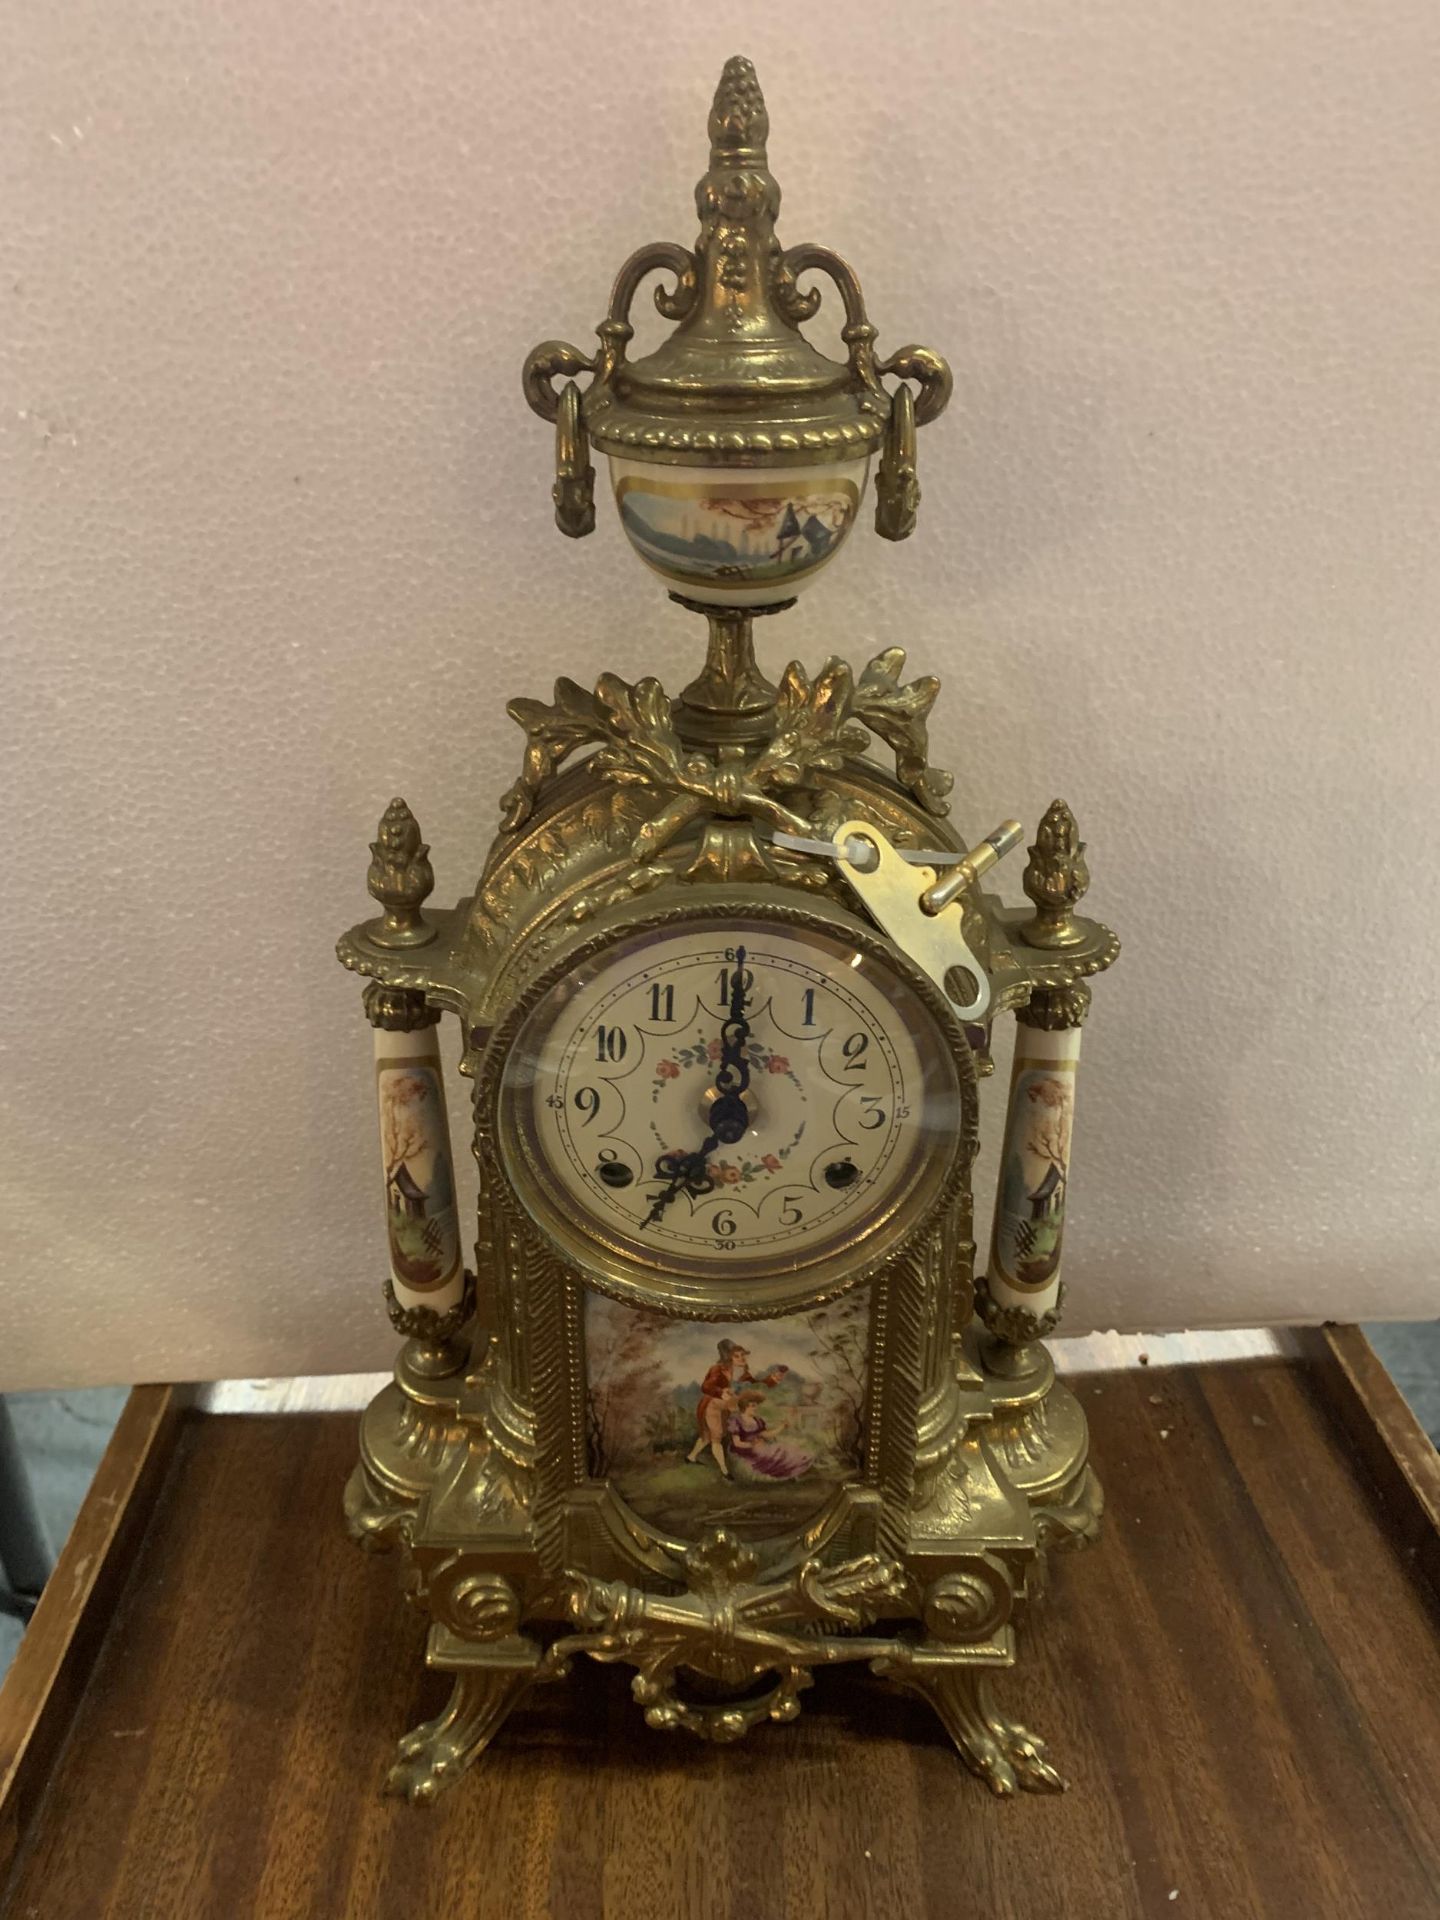 A DECORATIVE MANTLE CLOCK WITH A COURTING COUPLE DESIGN, GARNITURES AND KEY - Image 2 of 5